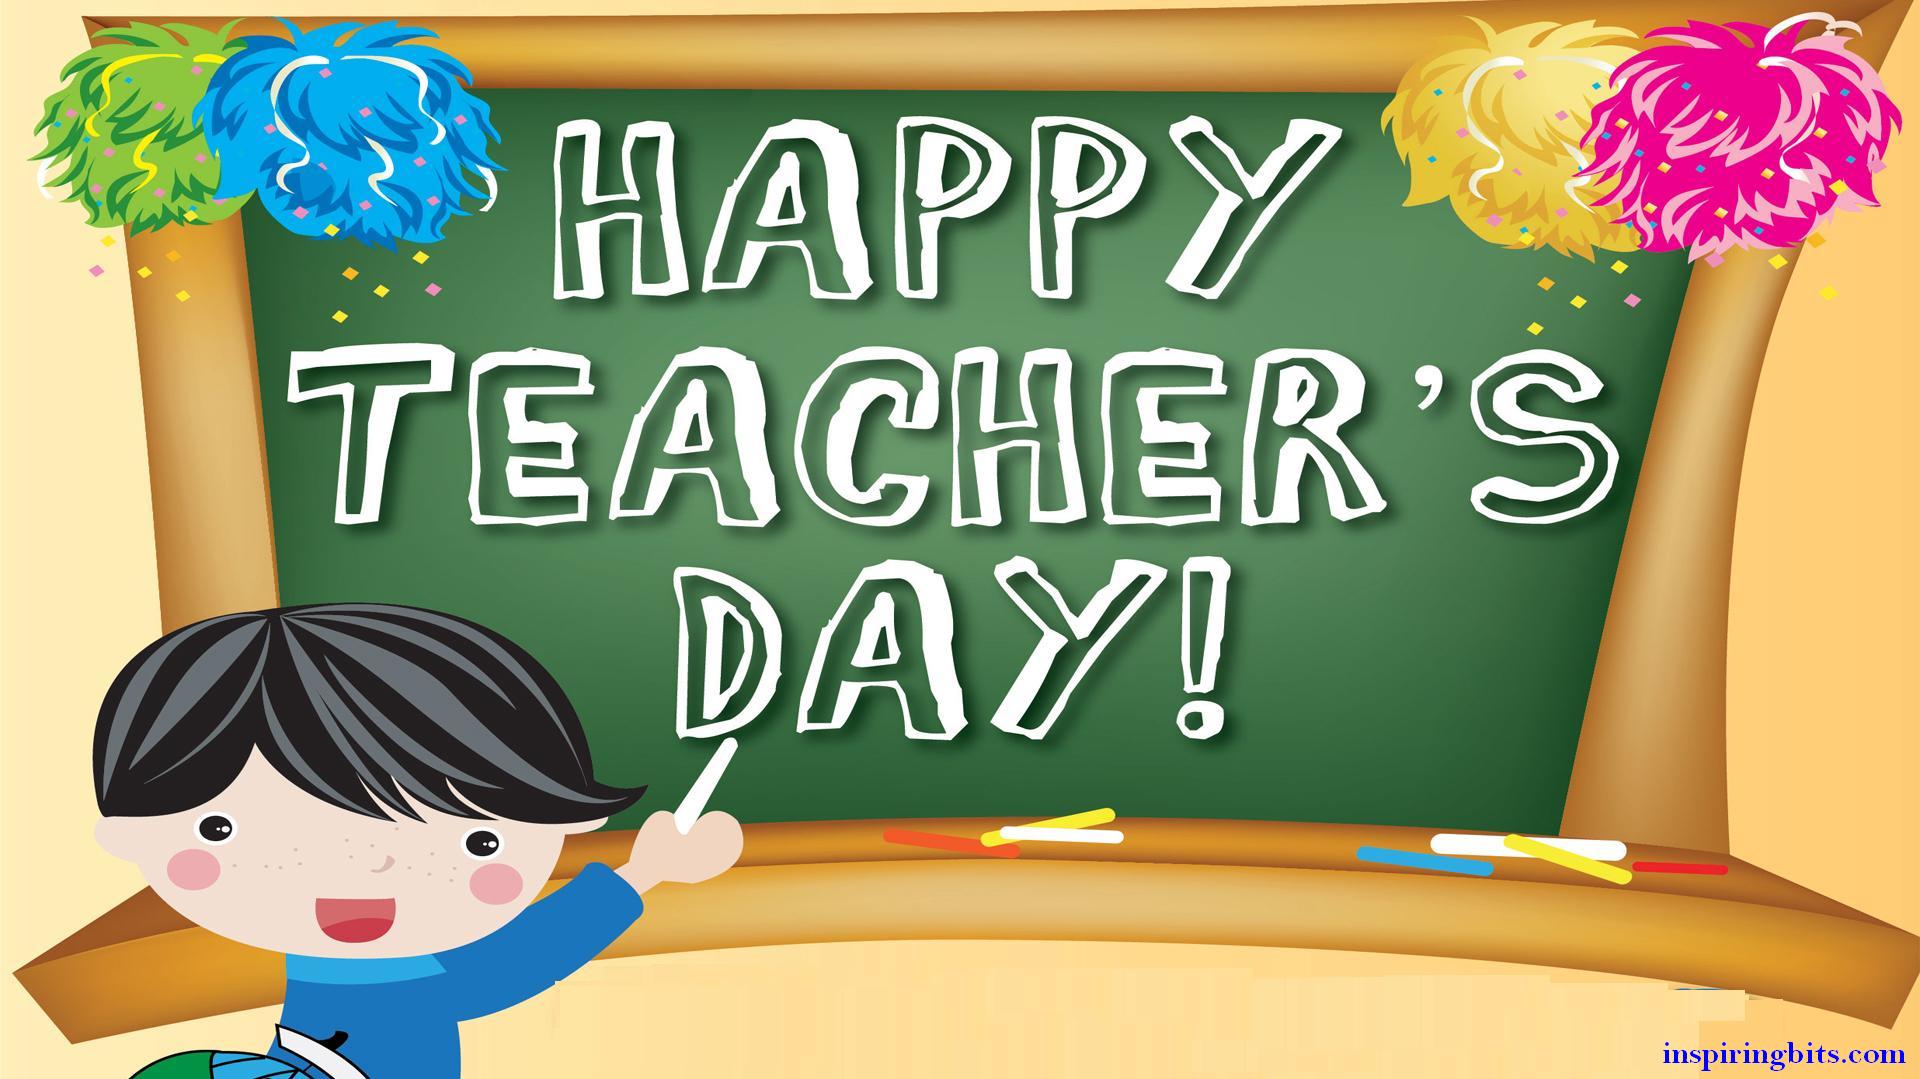 Teachers Day Images, Quotes, SMS, Wishes, Clipart